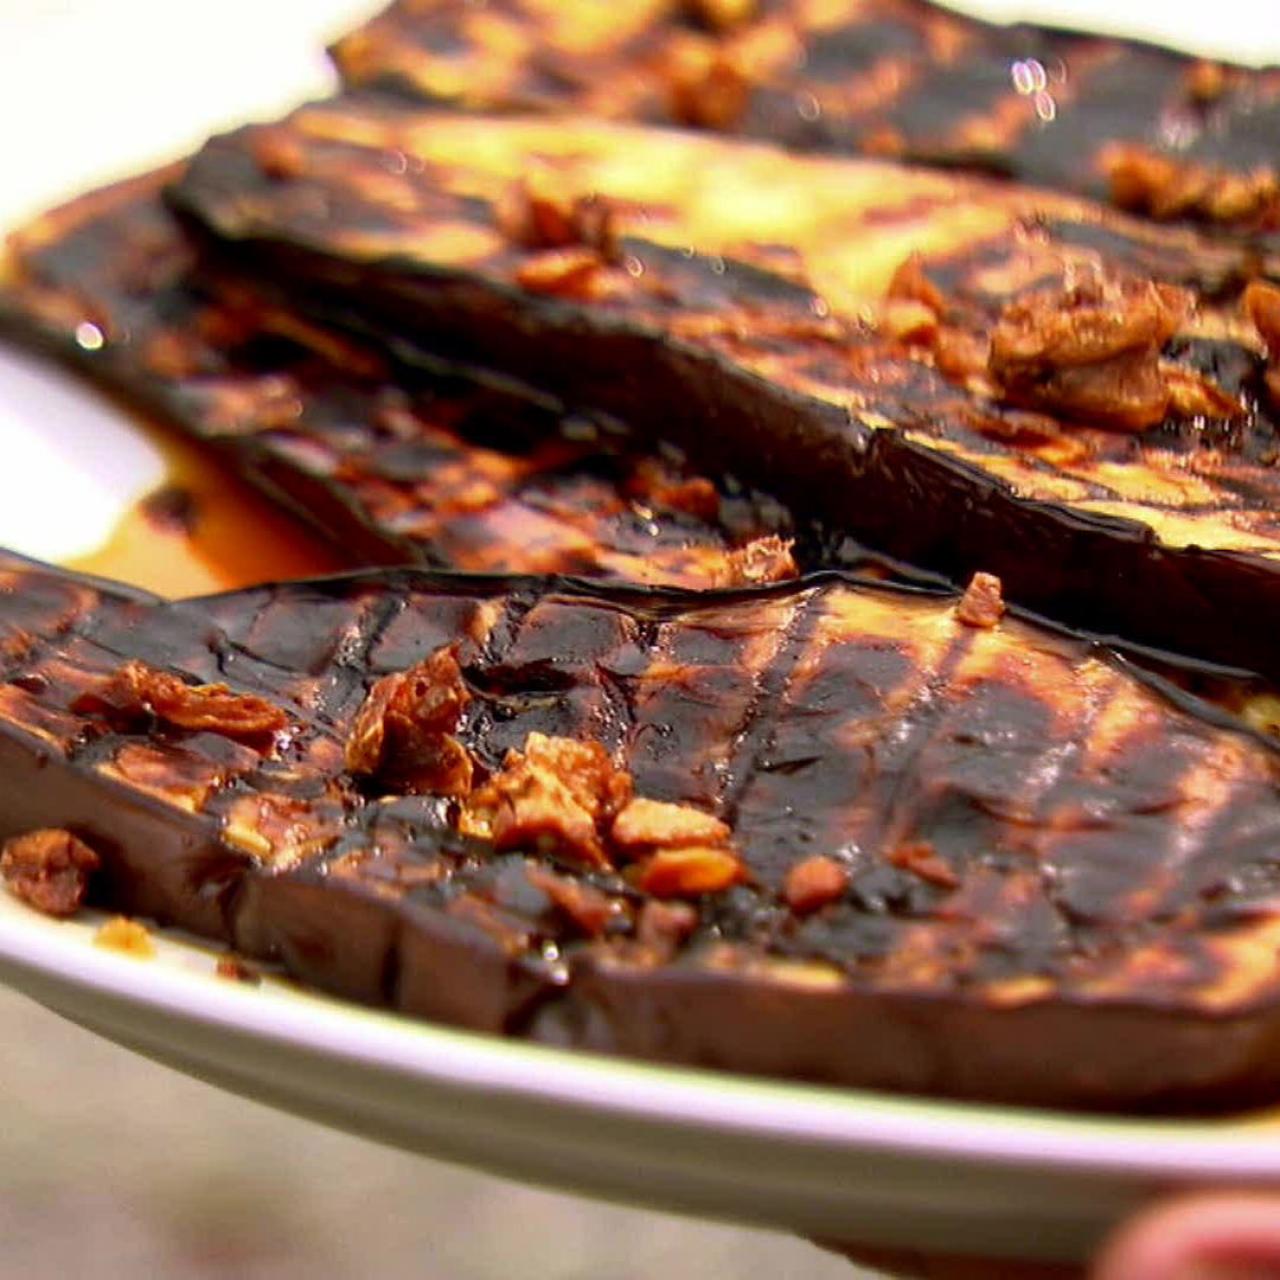 https://food.fnr.sndimg.com/content/dam/images/food/fullset/2012/2/13/0/BX0603H_grilled-eggplant-with-sherry-vinegar-drizzle_s4x3.jpg.rend.hgtvcom.1280.1280.suffix/1371603143118.jpeg